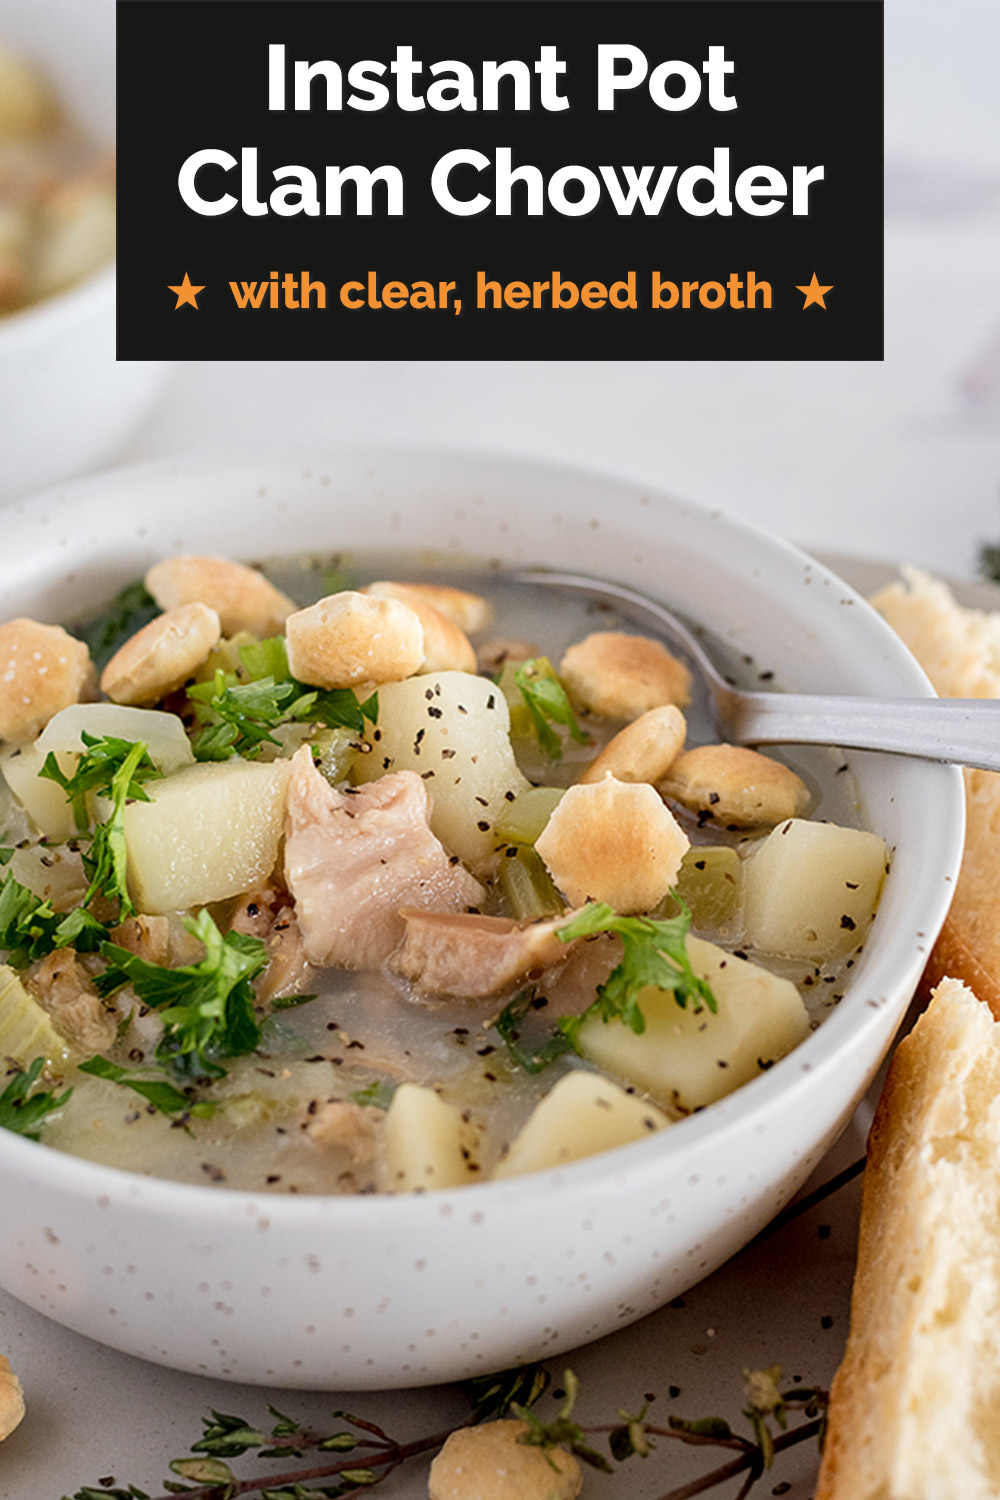 This lightened-up clam chowder has the classic herb and garlic flavors of traditional clam chowder—without the extra cream—and made fast in the Instant Pot! #PressureCookingToday #PCT #InstantPotRecipe #InstantPot via @PressureCook2da